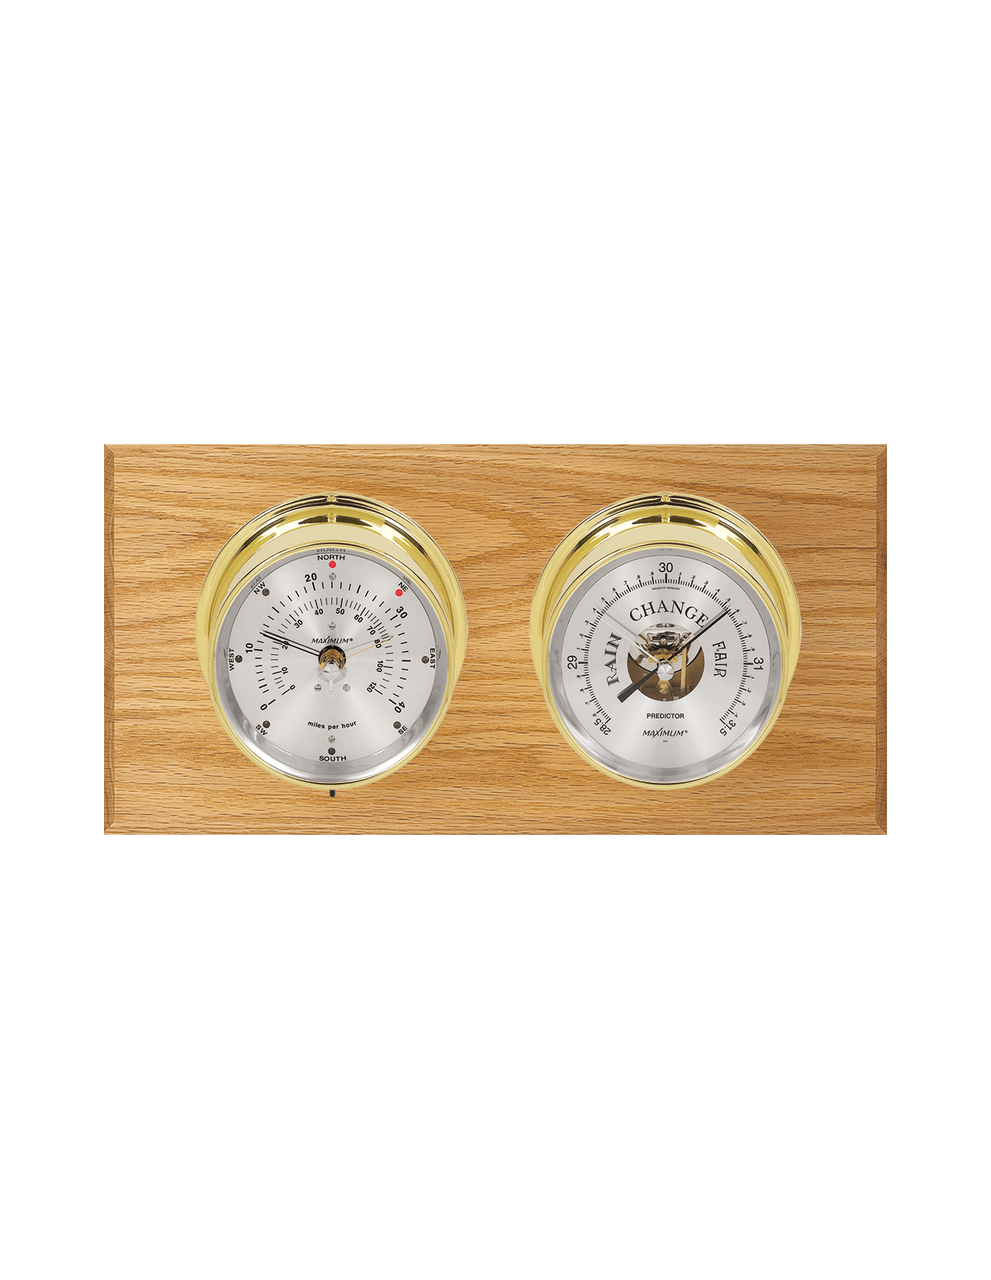 Wind and Barometer Weather Station - 2 Instruments - Polished Brass Cases - Oak  Wood - Silver Face -  2 Scales -Reads 0-120 mph